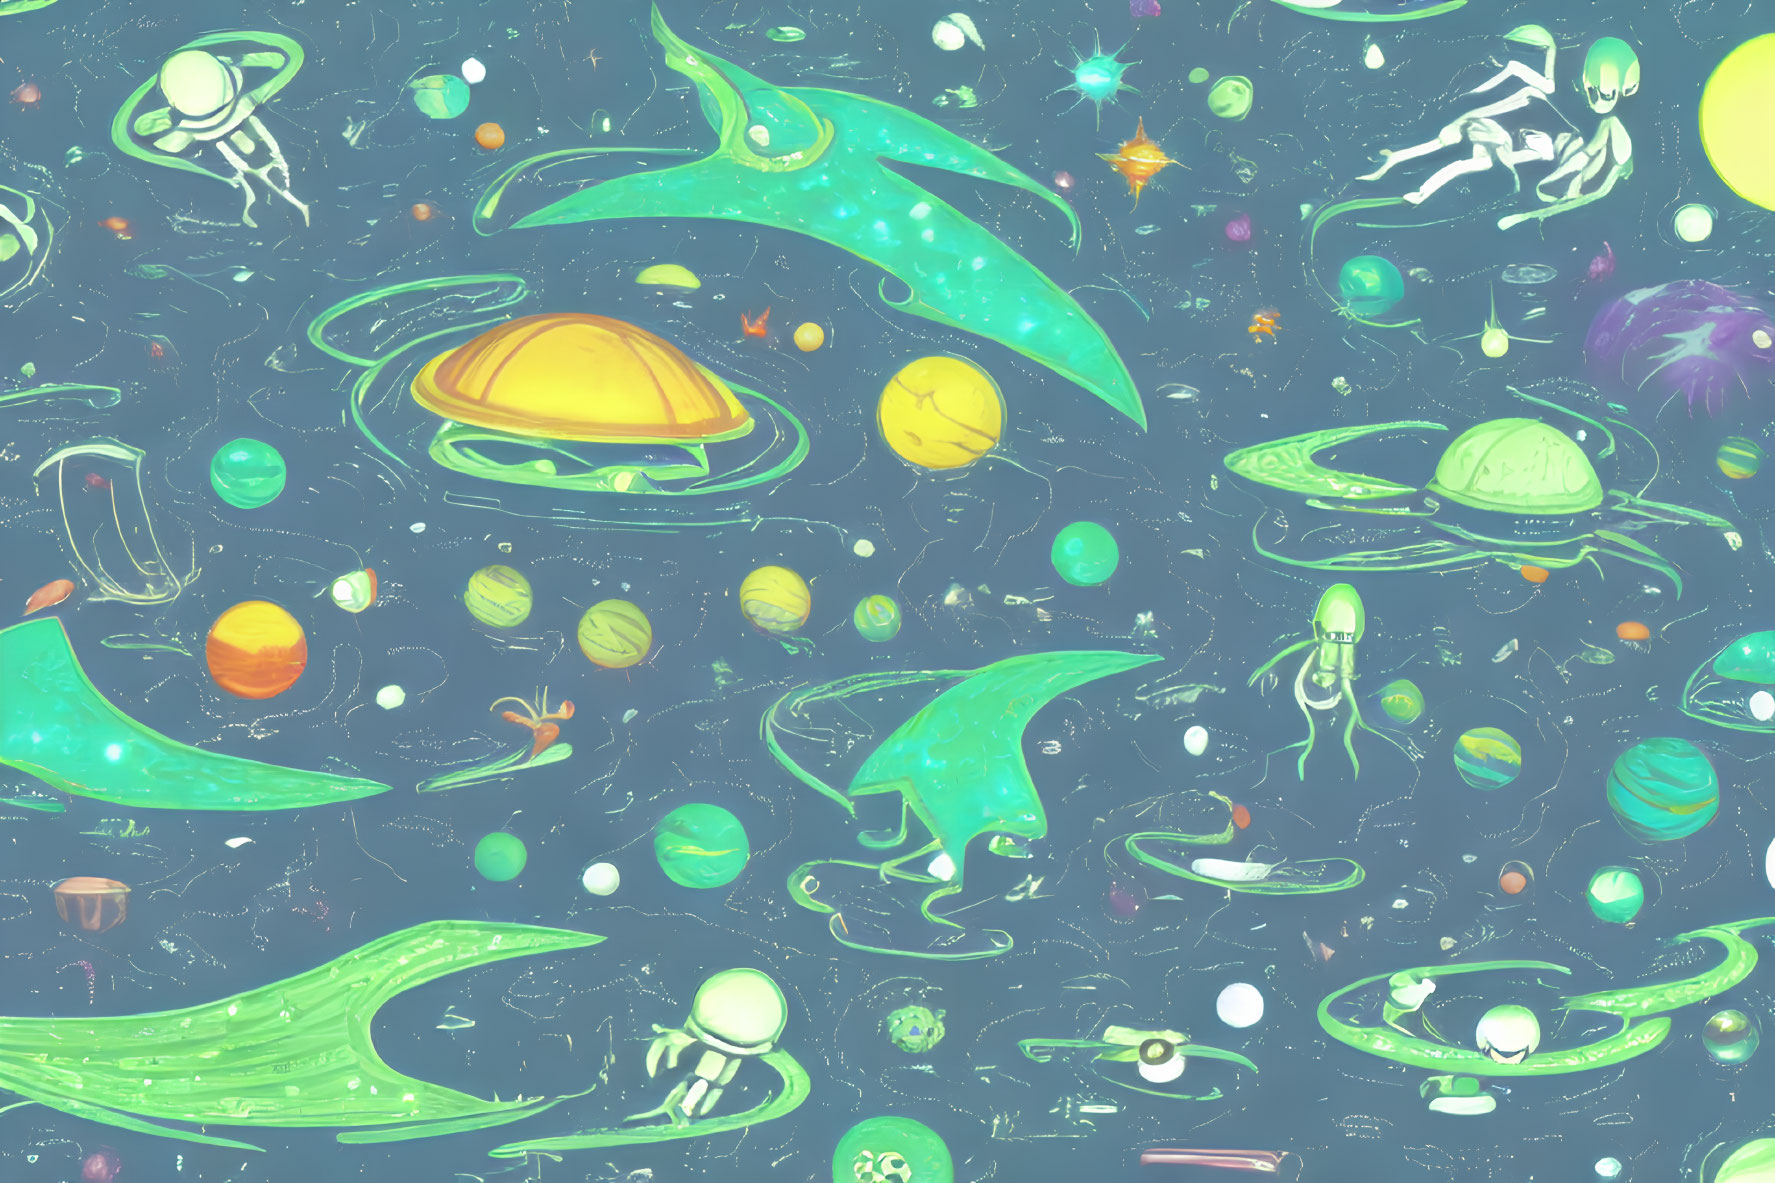 Colorful Space-themed Illustration with Planets, Stars, Astronauts, and Spaceships